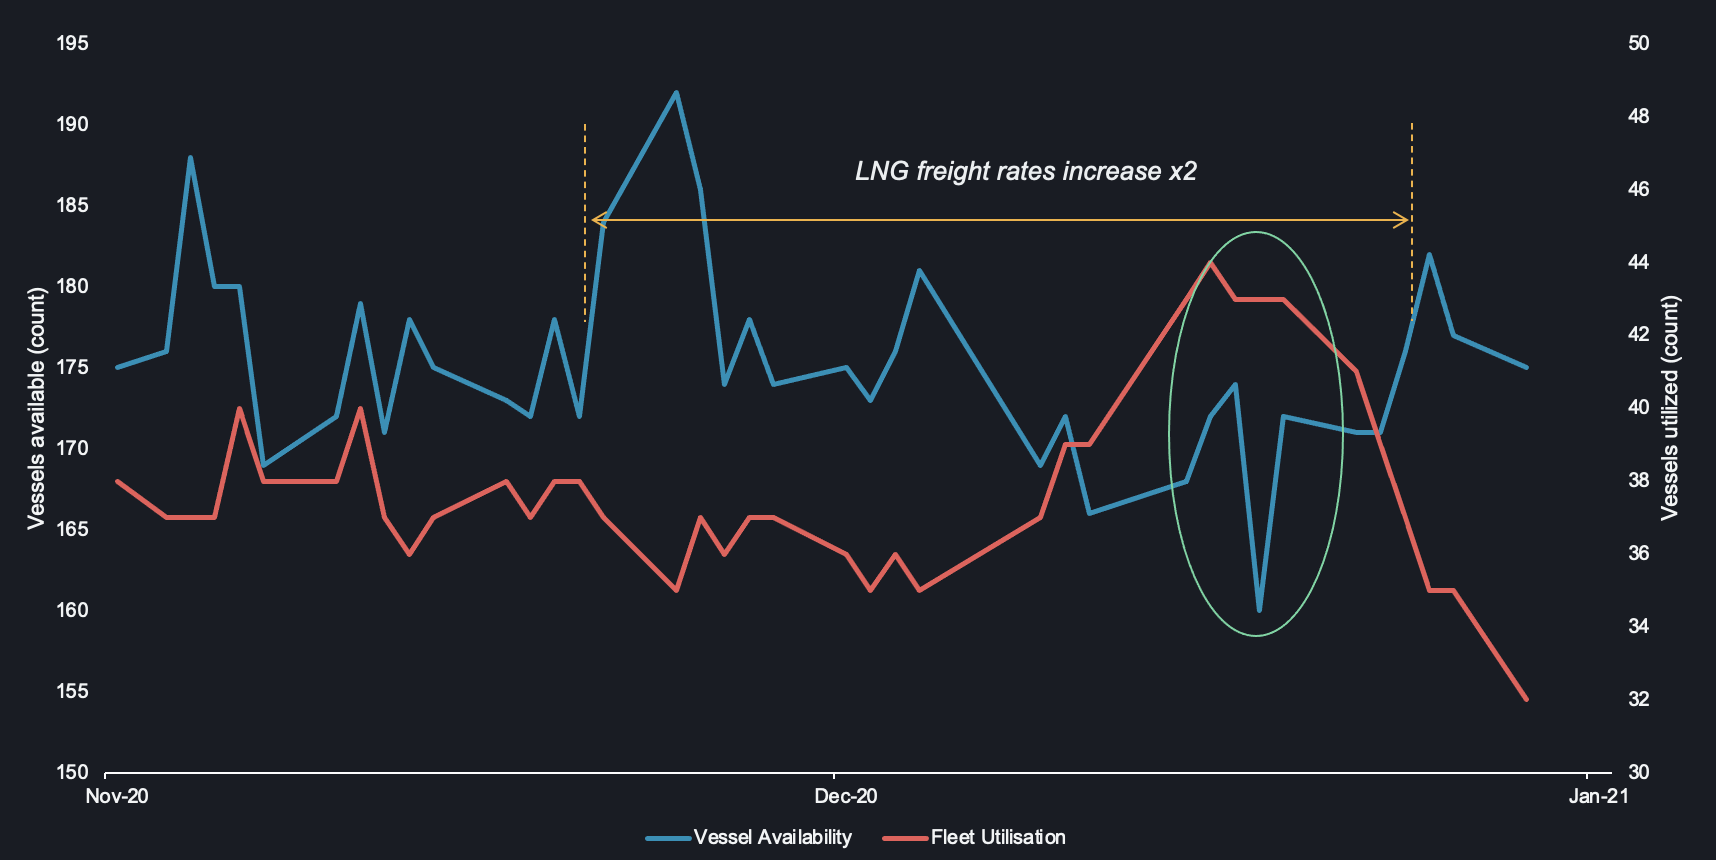 data showing the LNG freight rates increasing x2